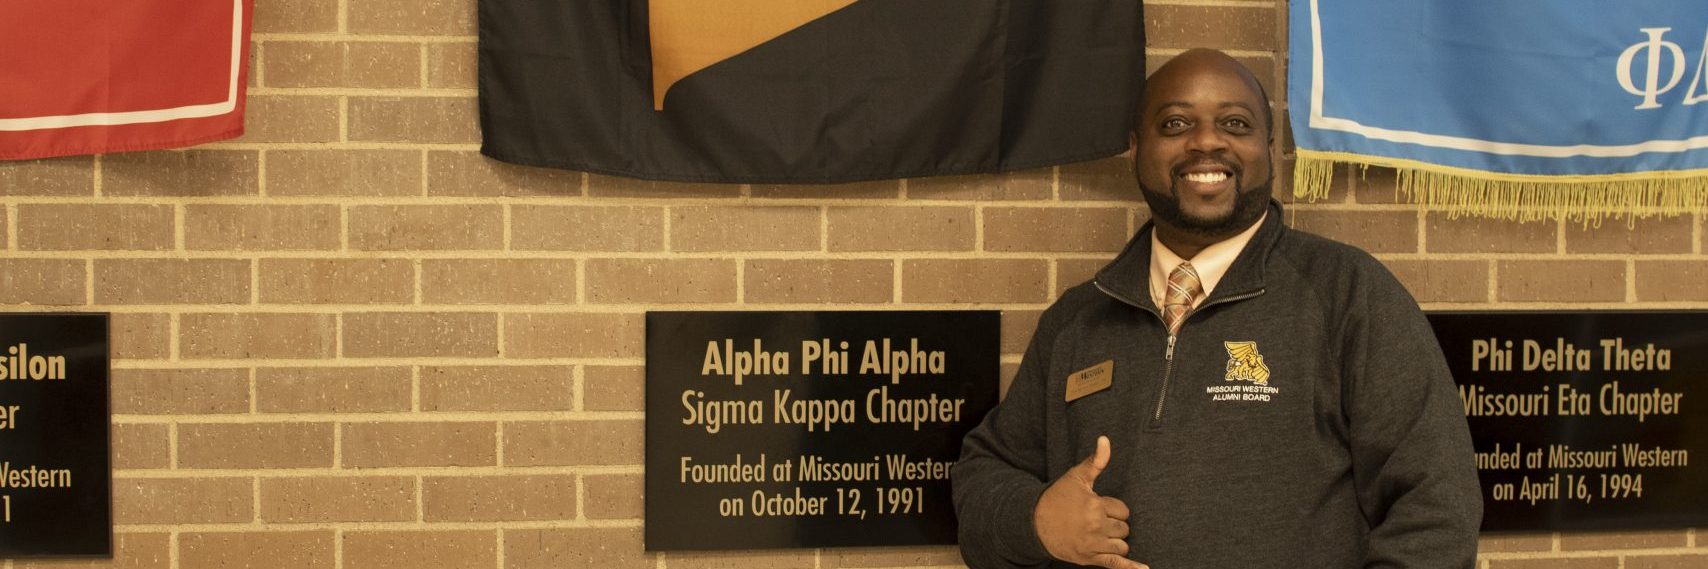 Lai-Monté Hunter posing in front of the Alpha Phi Alpha Sigma Kappa Chapter flag and plaque